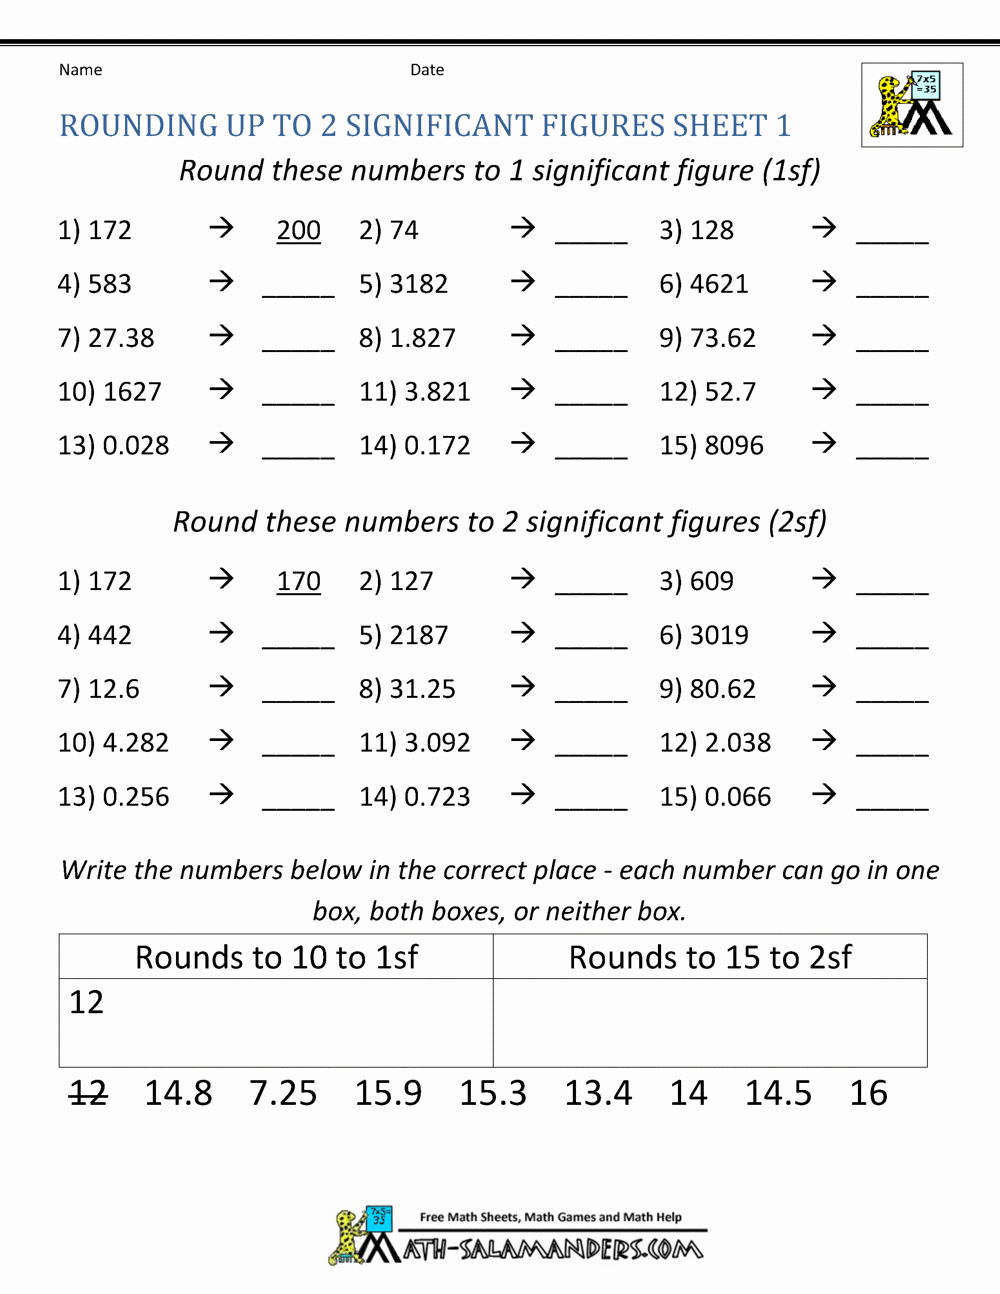 Significant Figures Worksheet with Answers Awesome Rounding Significant Figures